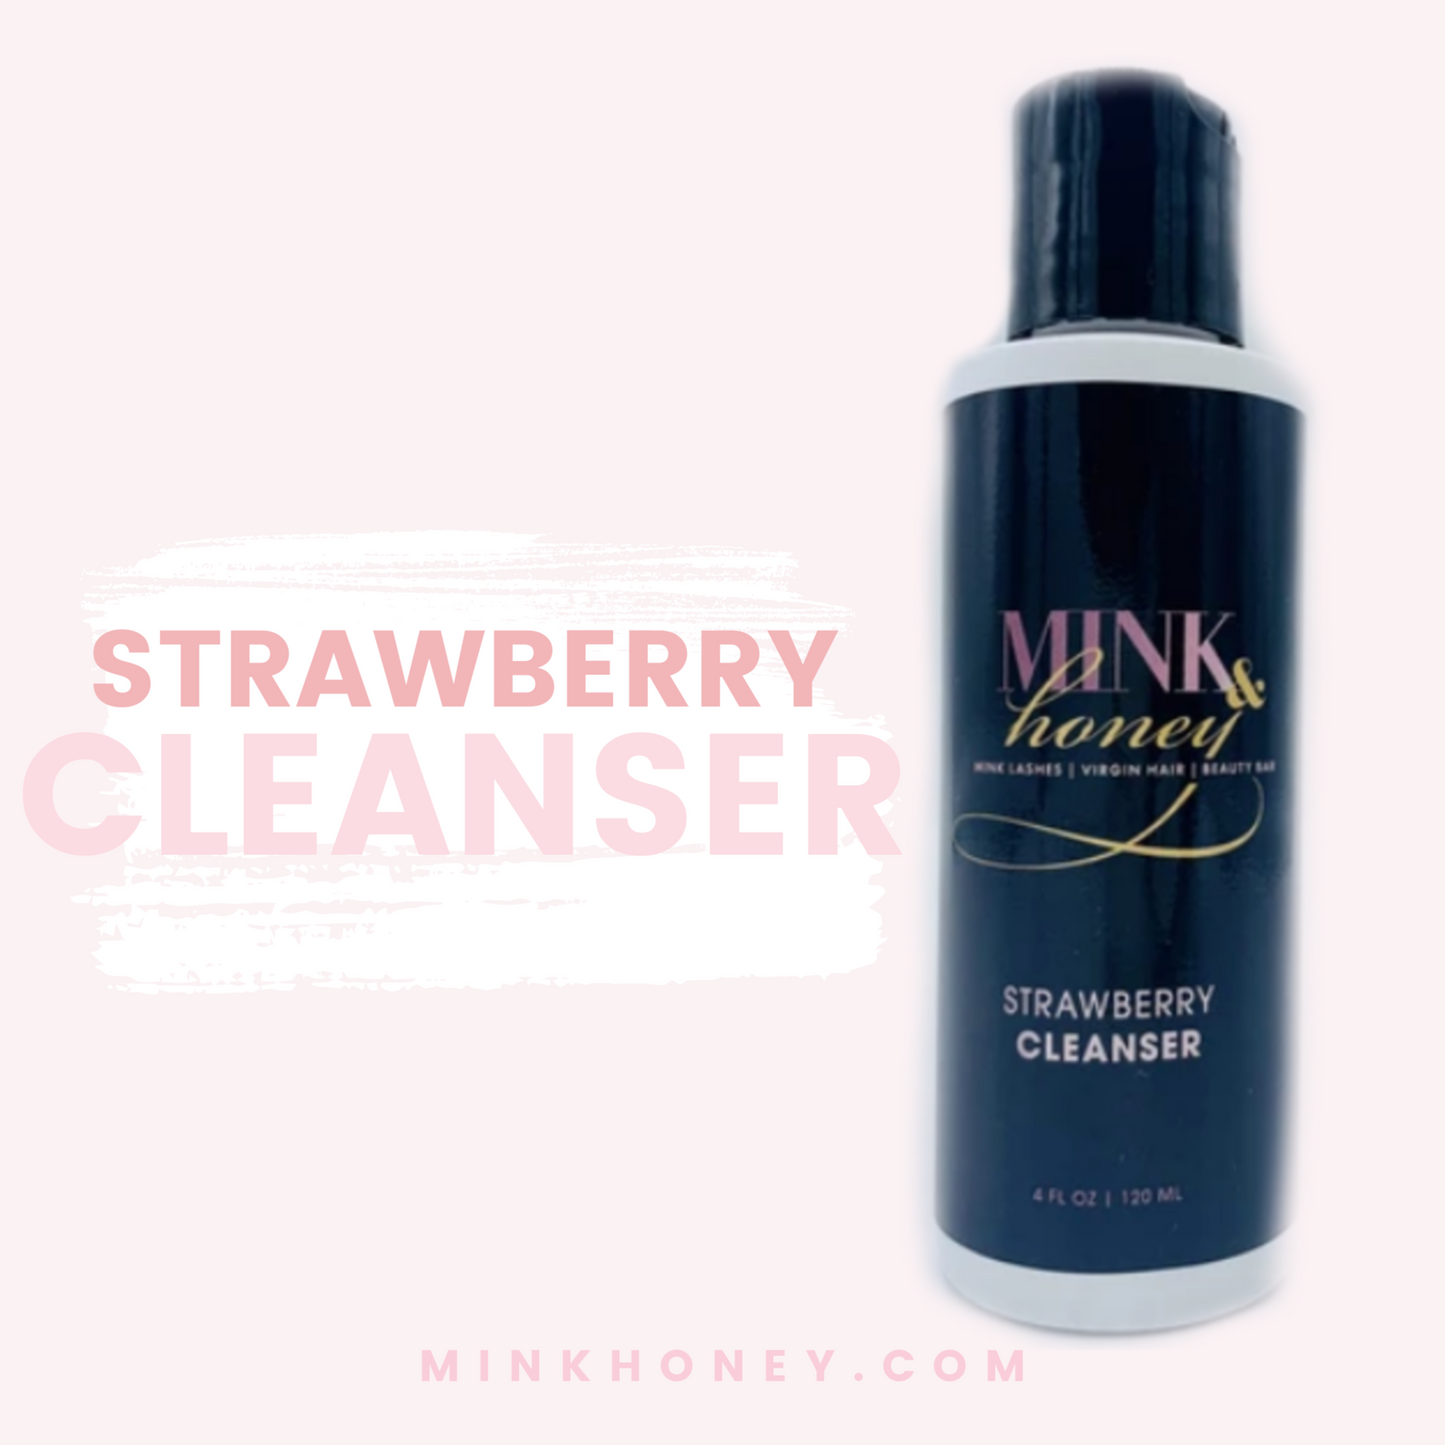 Strawberry Cleanser